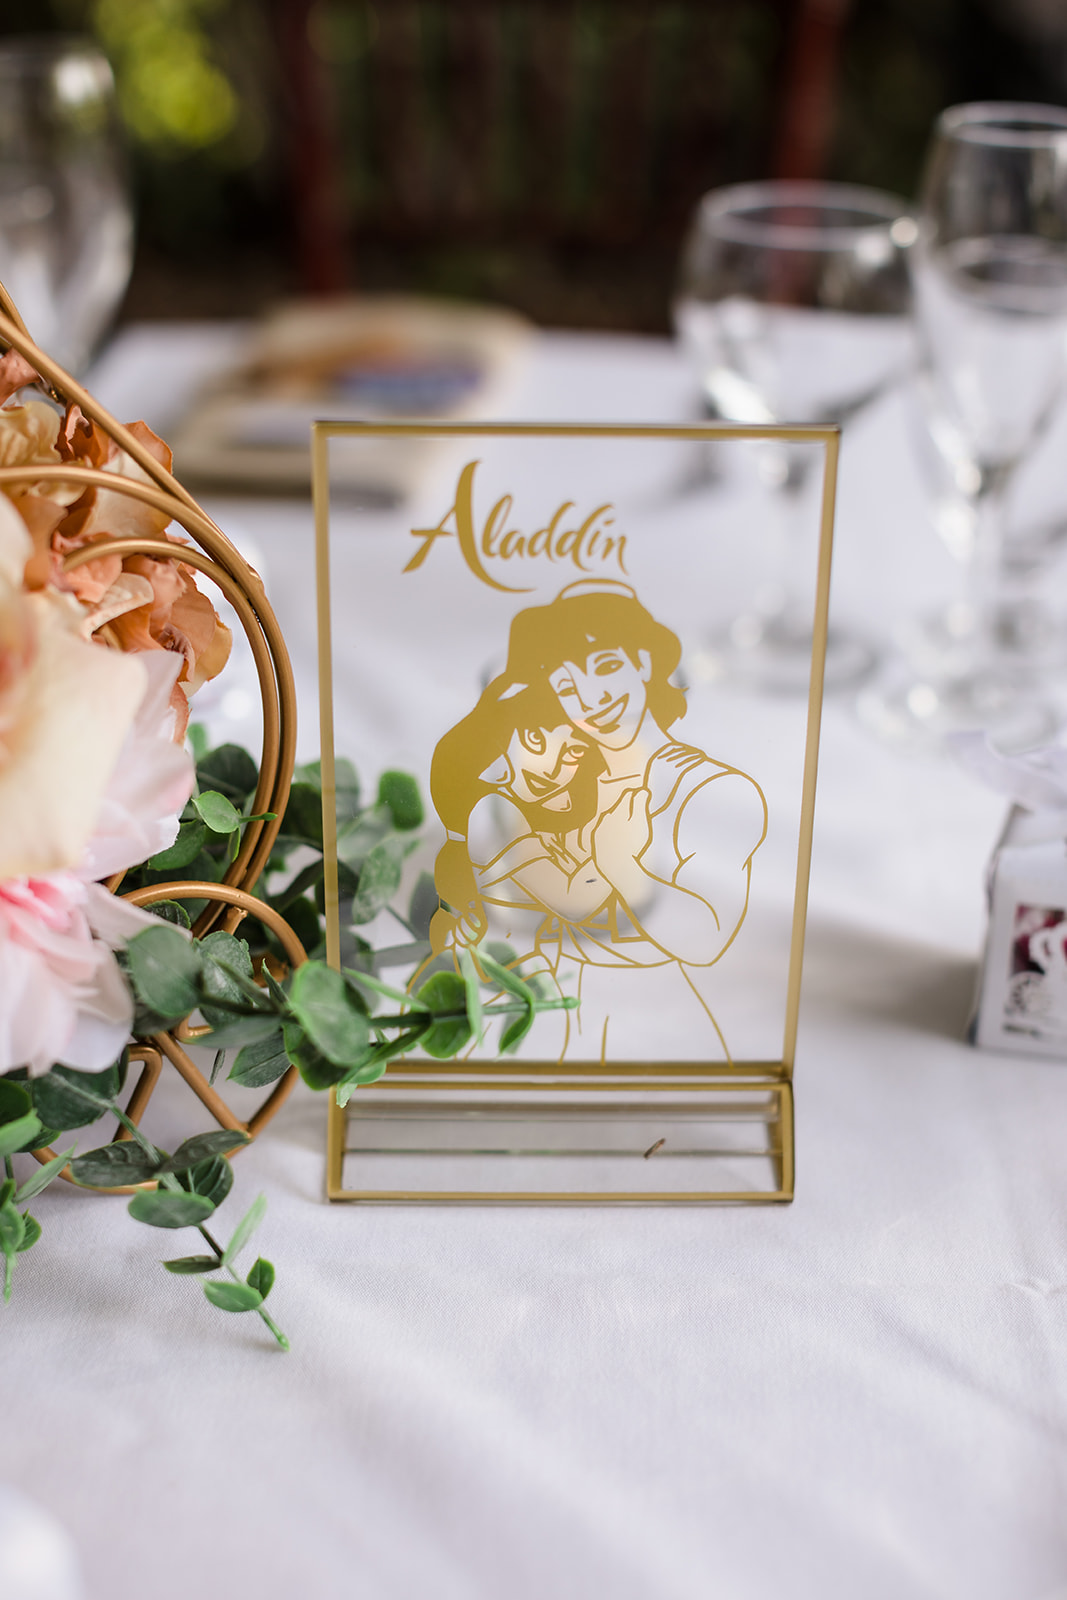 Aladdin wedding reception table markers made from glass with gold printing